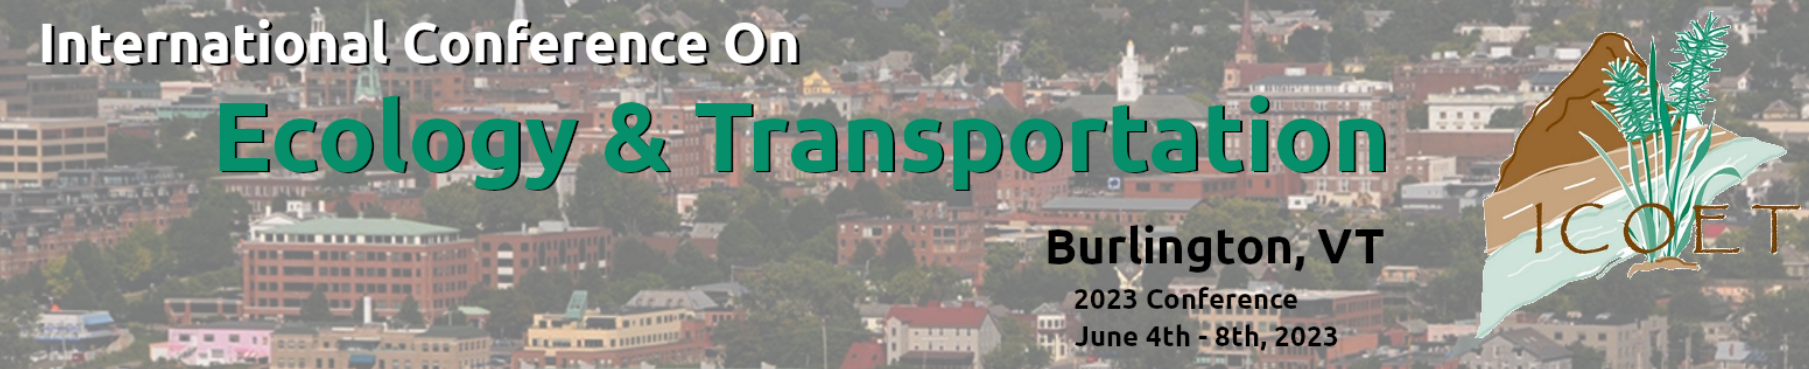 International Conference on Ecology and Transportation 2023 Advertisement Banner